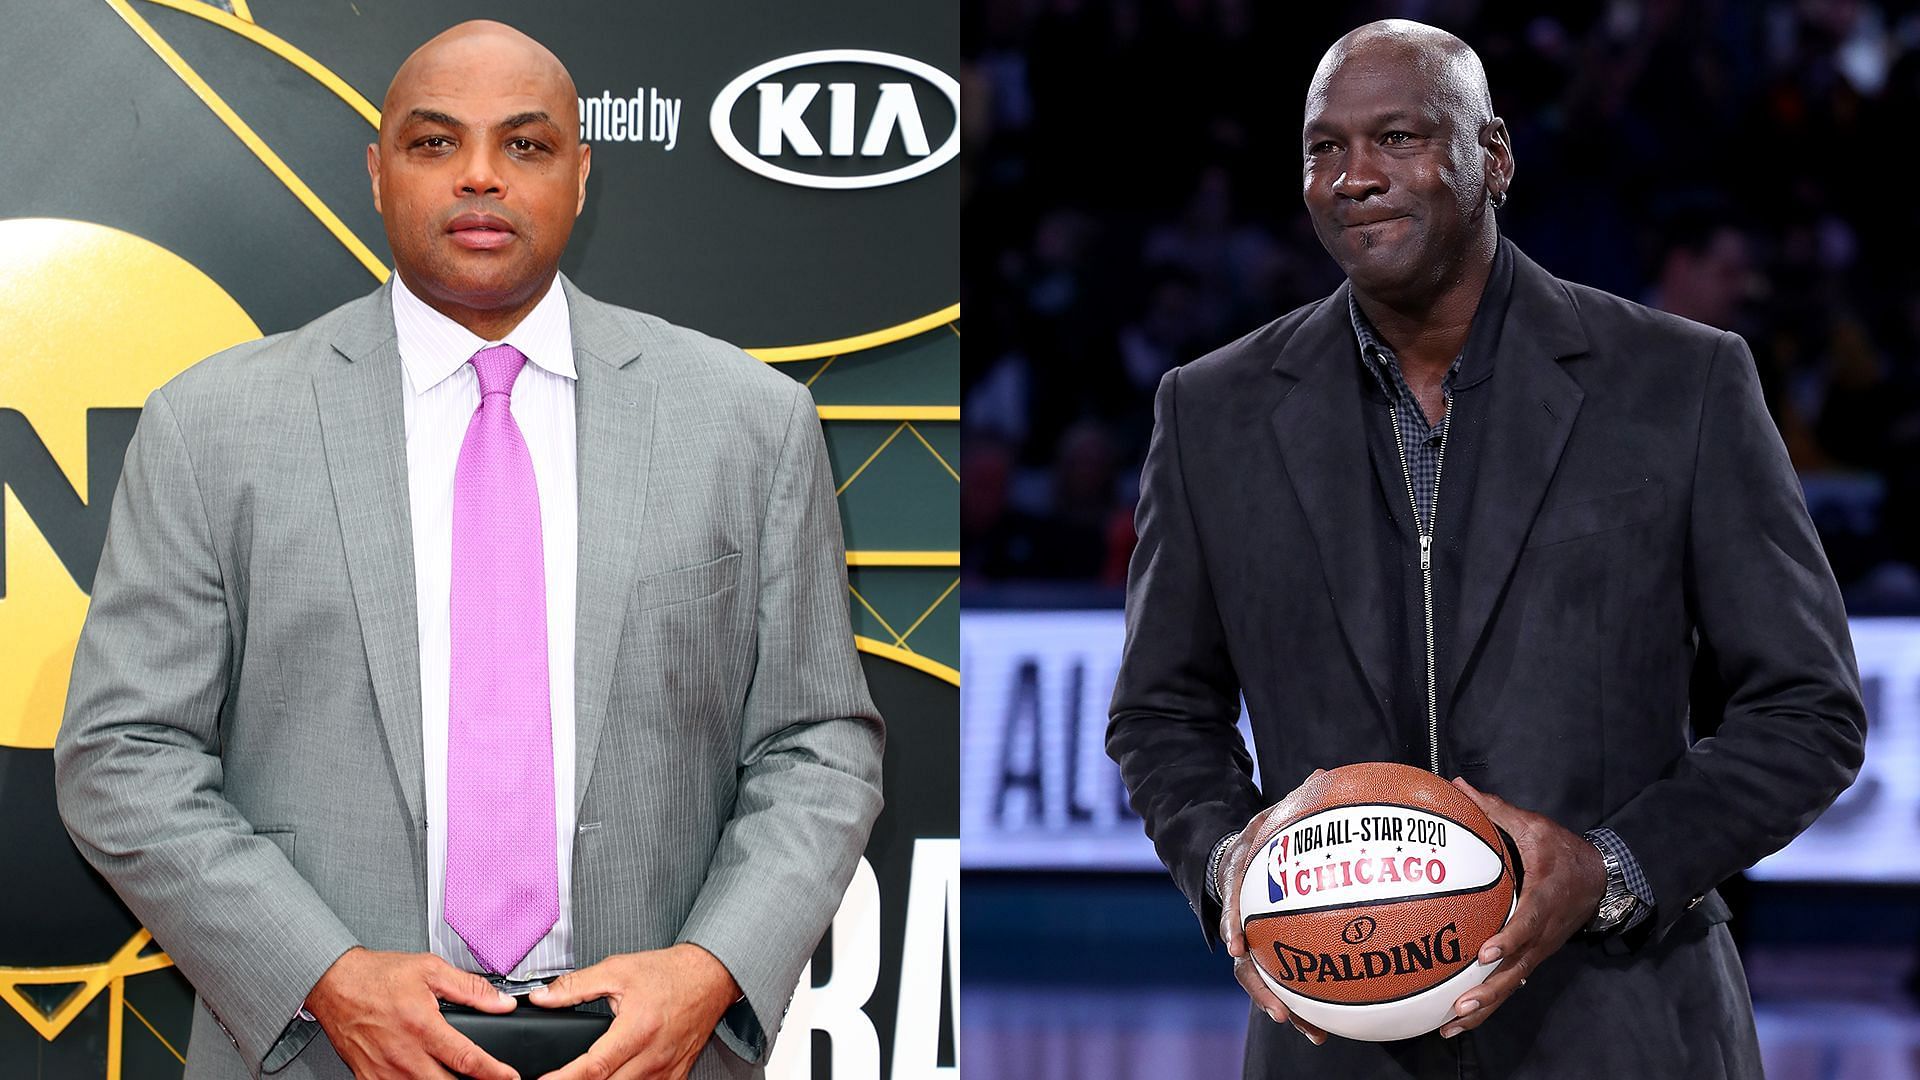 Charles Barkley and Michael Jordan are not in speaking terms in more than 10 years. [Photo: Sporting News]